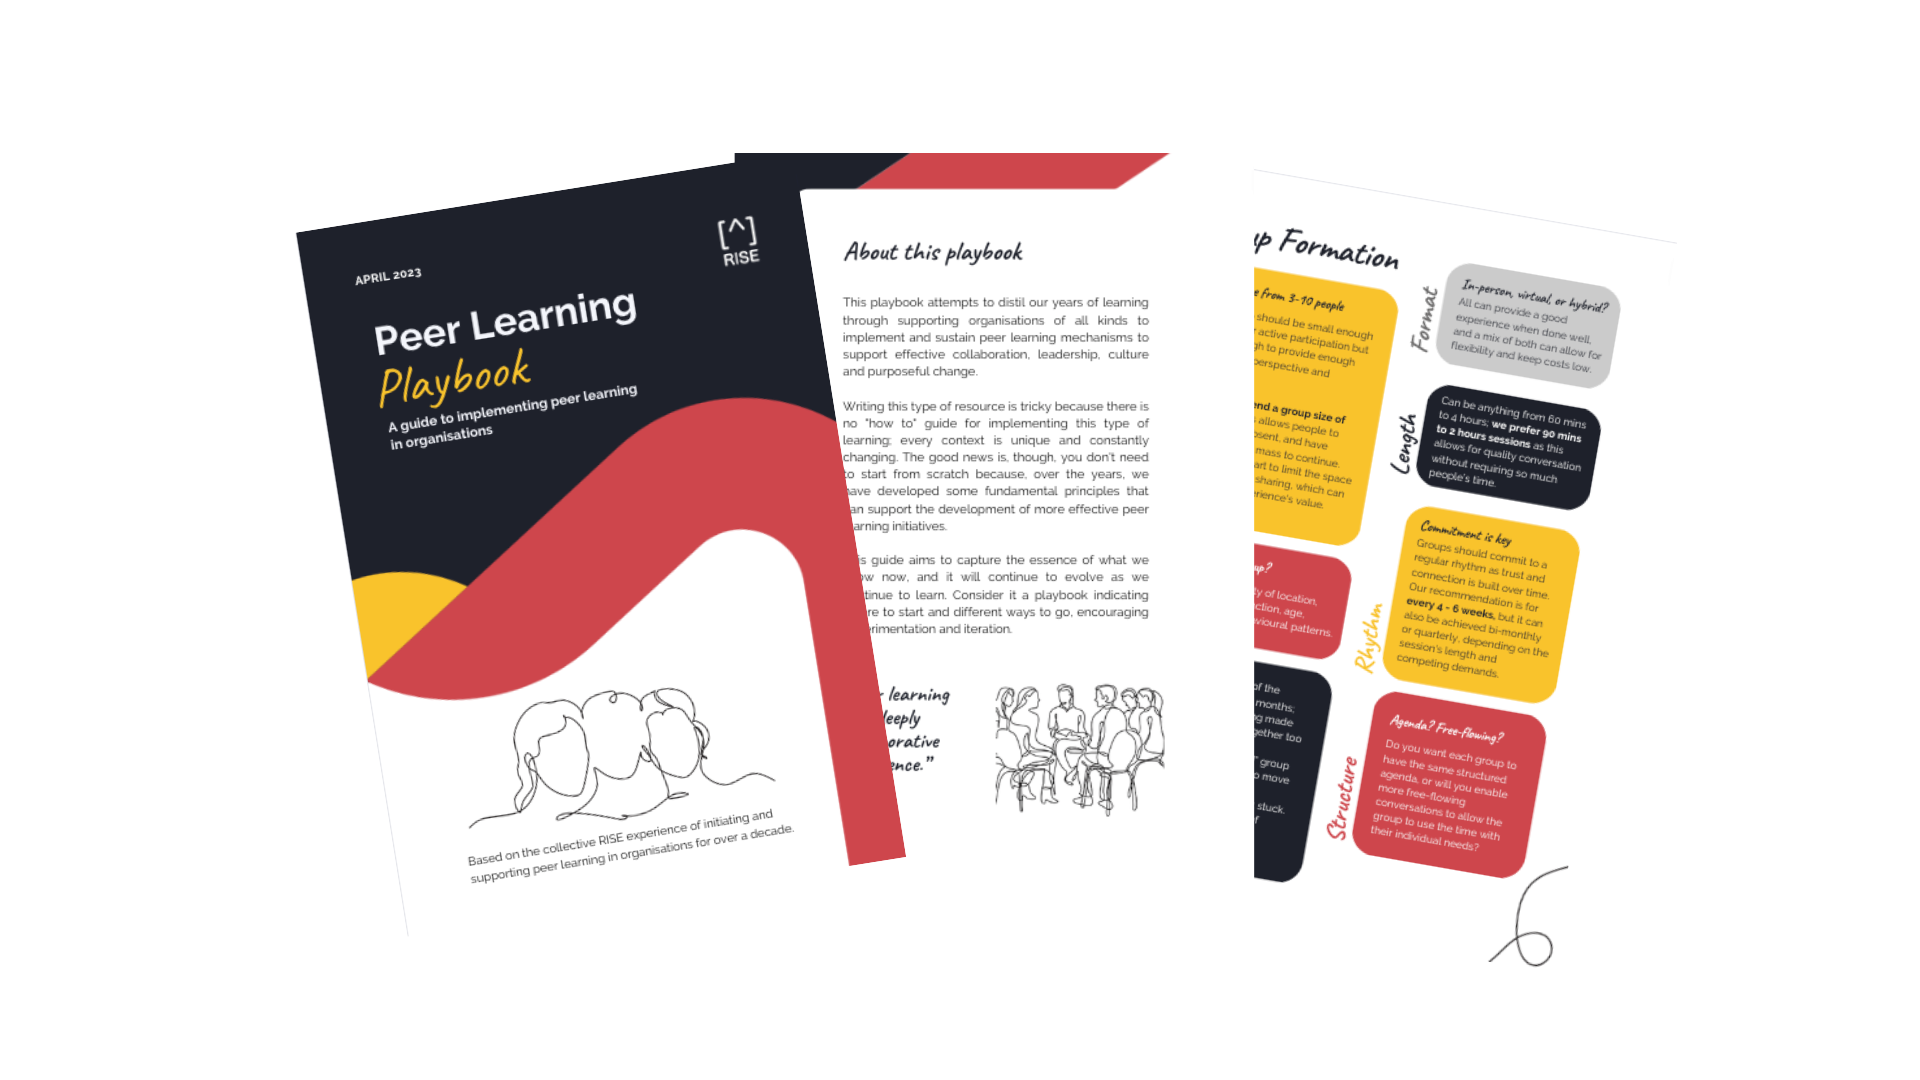 A guide to implementing peer learning in organisations (1)